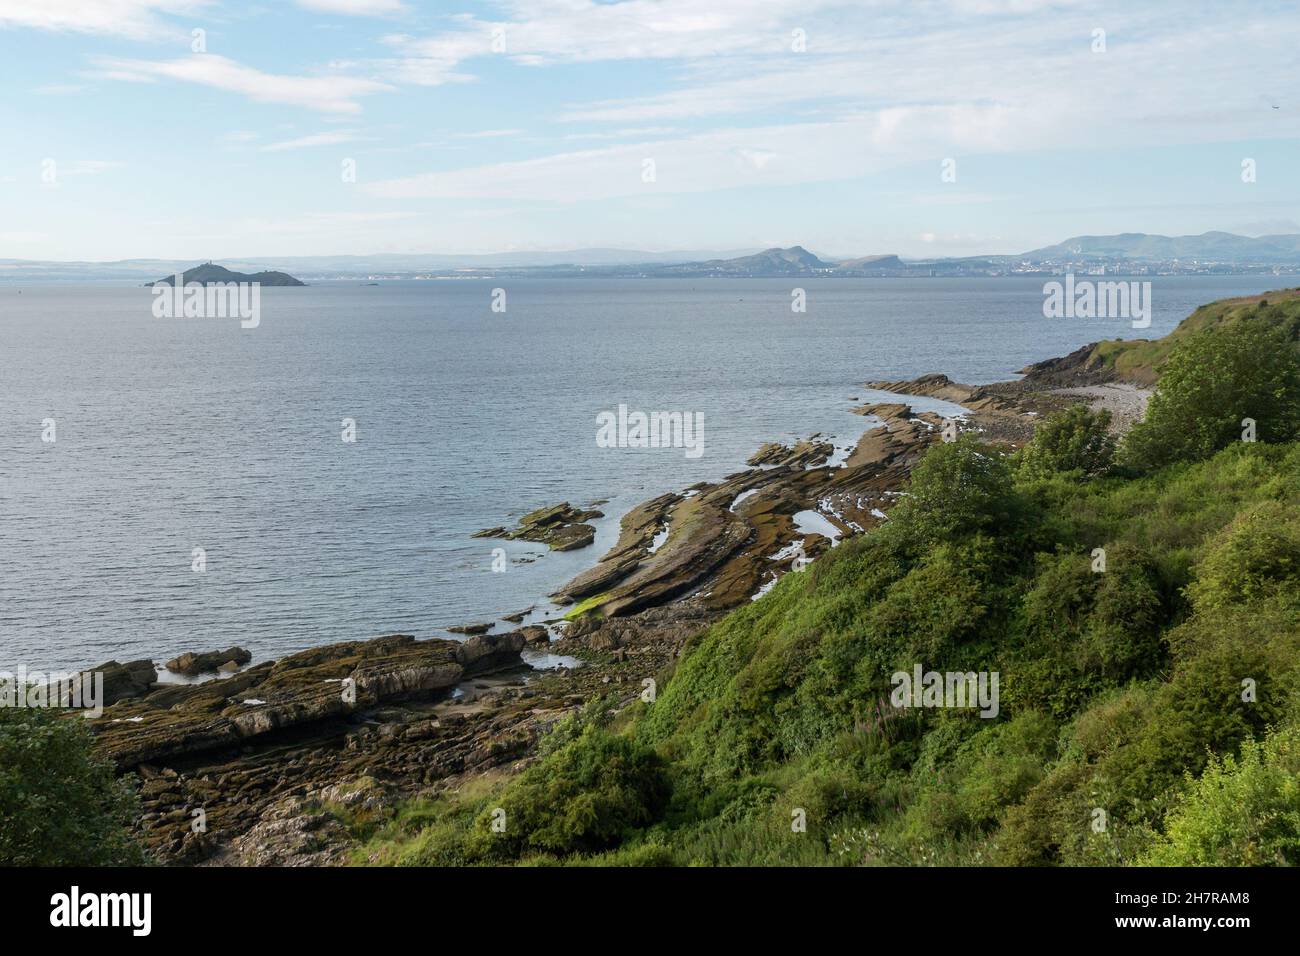 The Firth of Forth seen from the Fife Coastal Path near Kinghorn, Fife, Scotland. Stock Photo